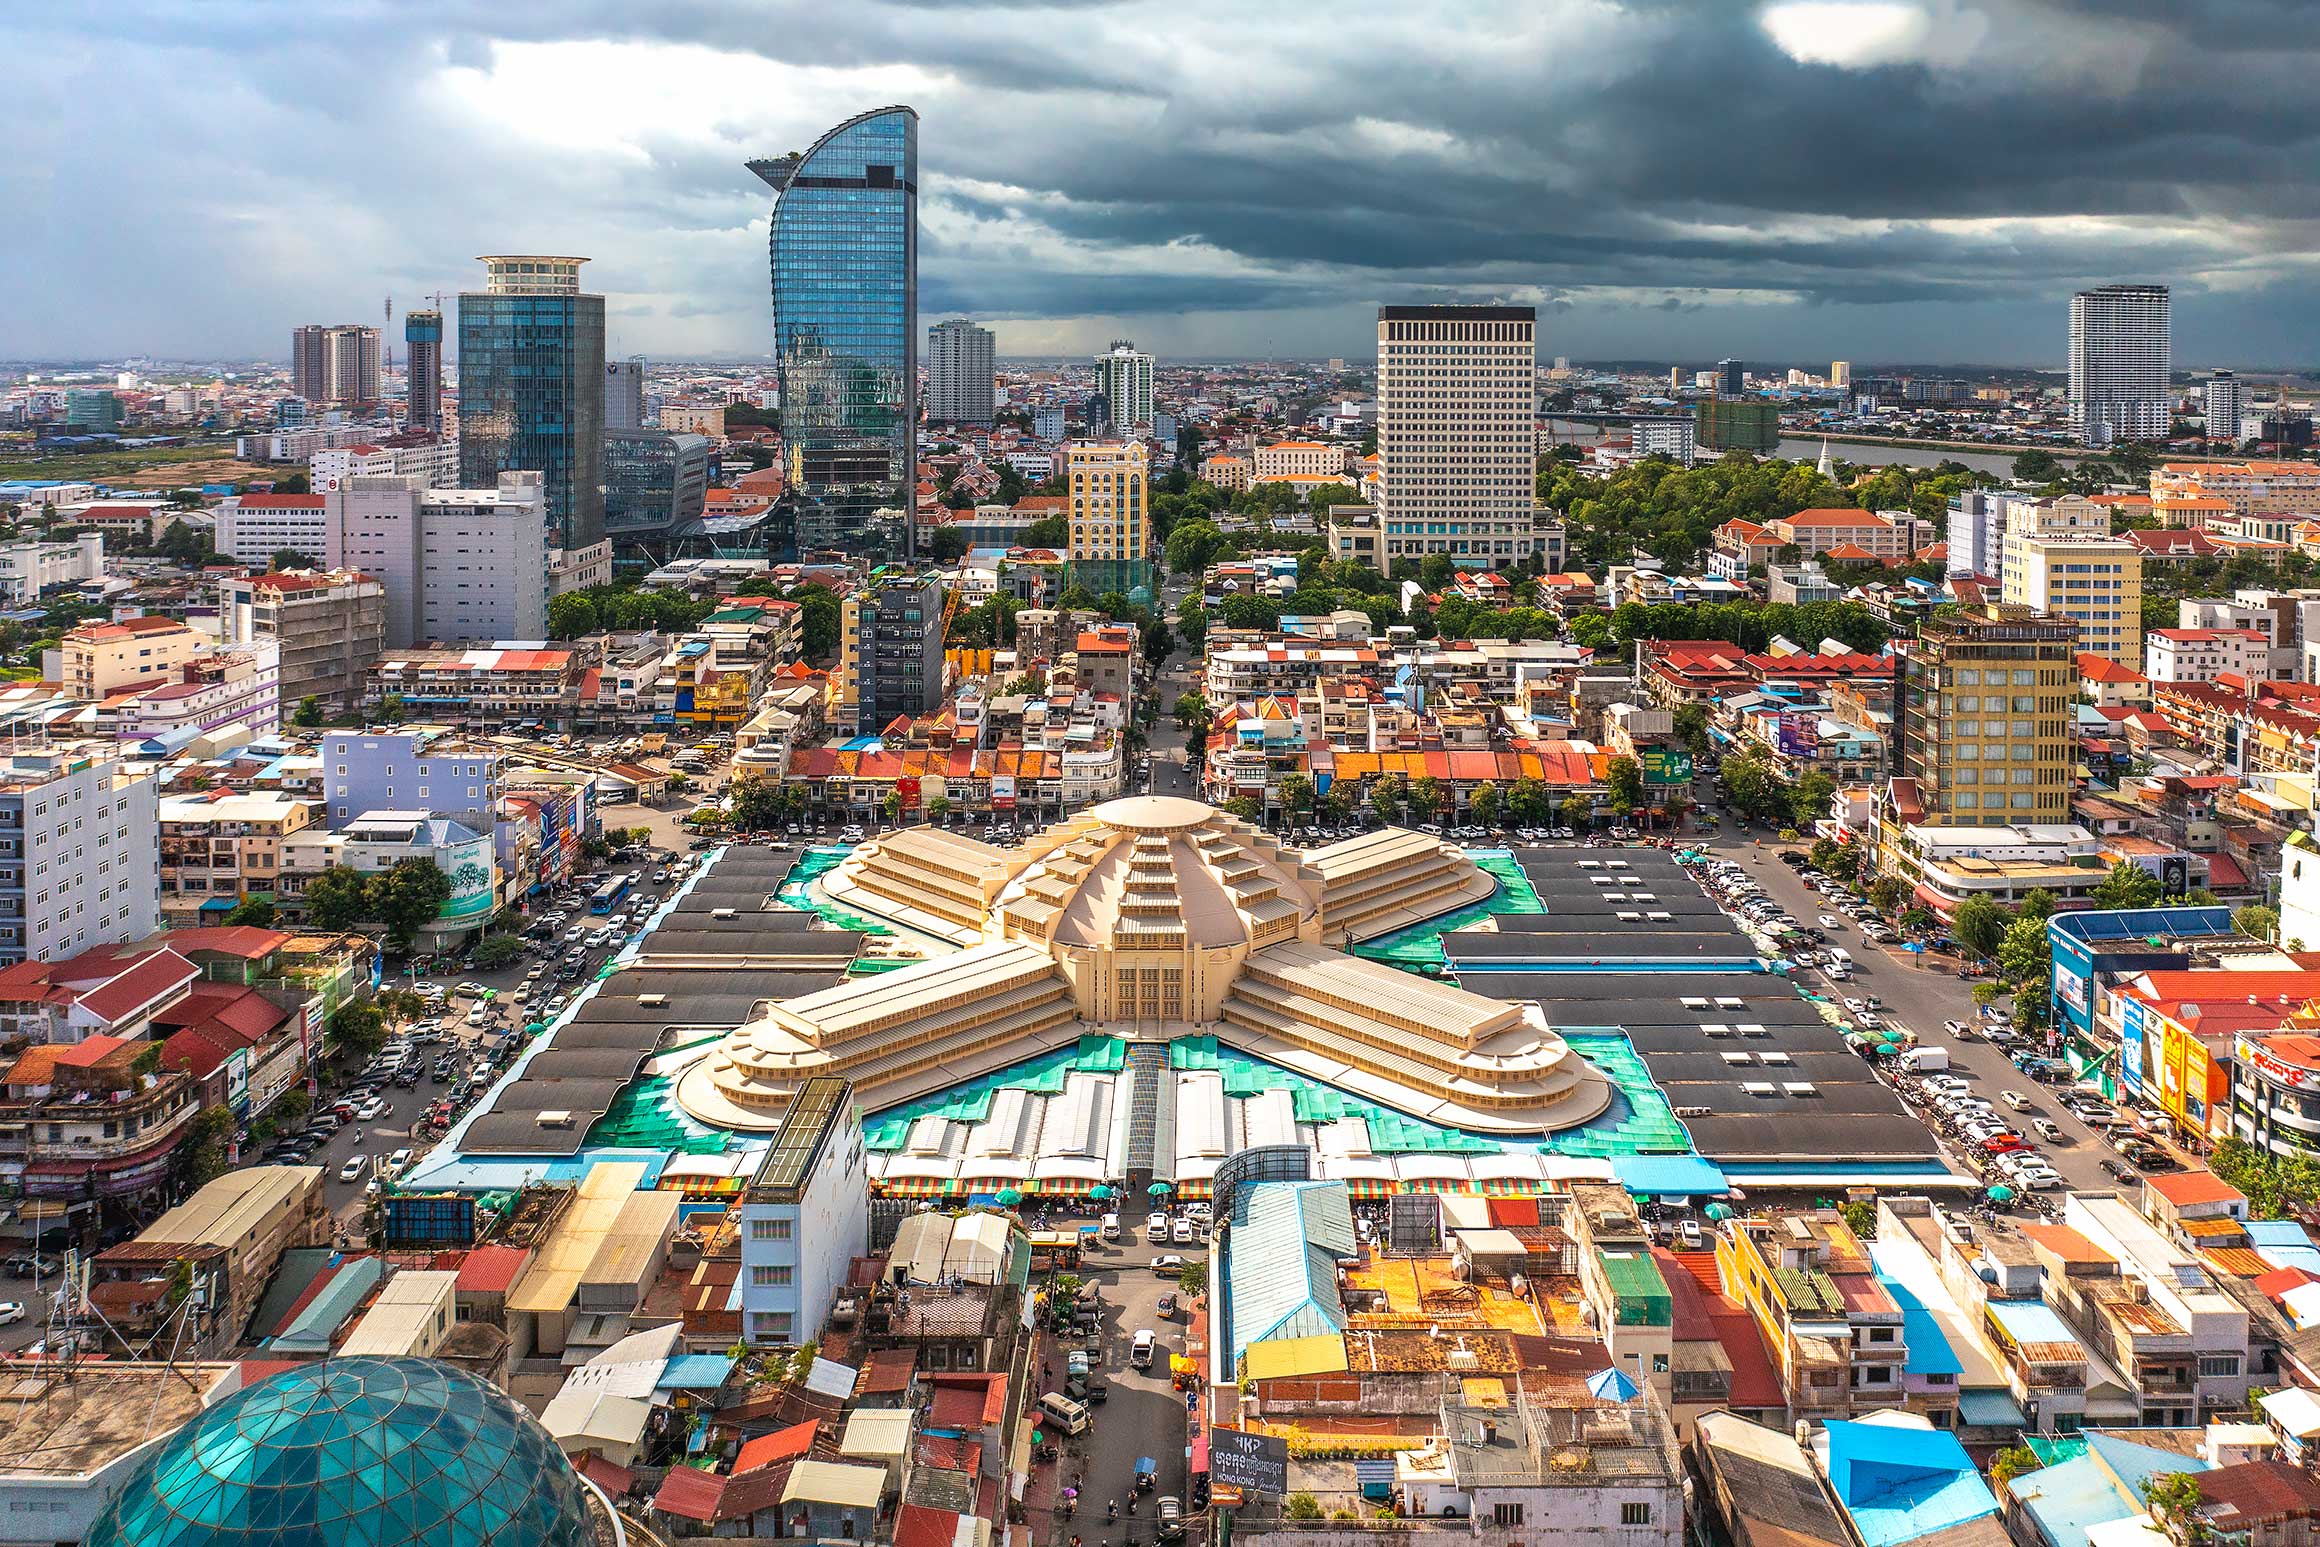 Central Market and Phnom Penh city views from the air | Aerial Photographer in Cambodia